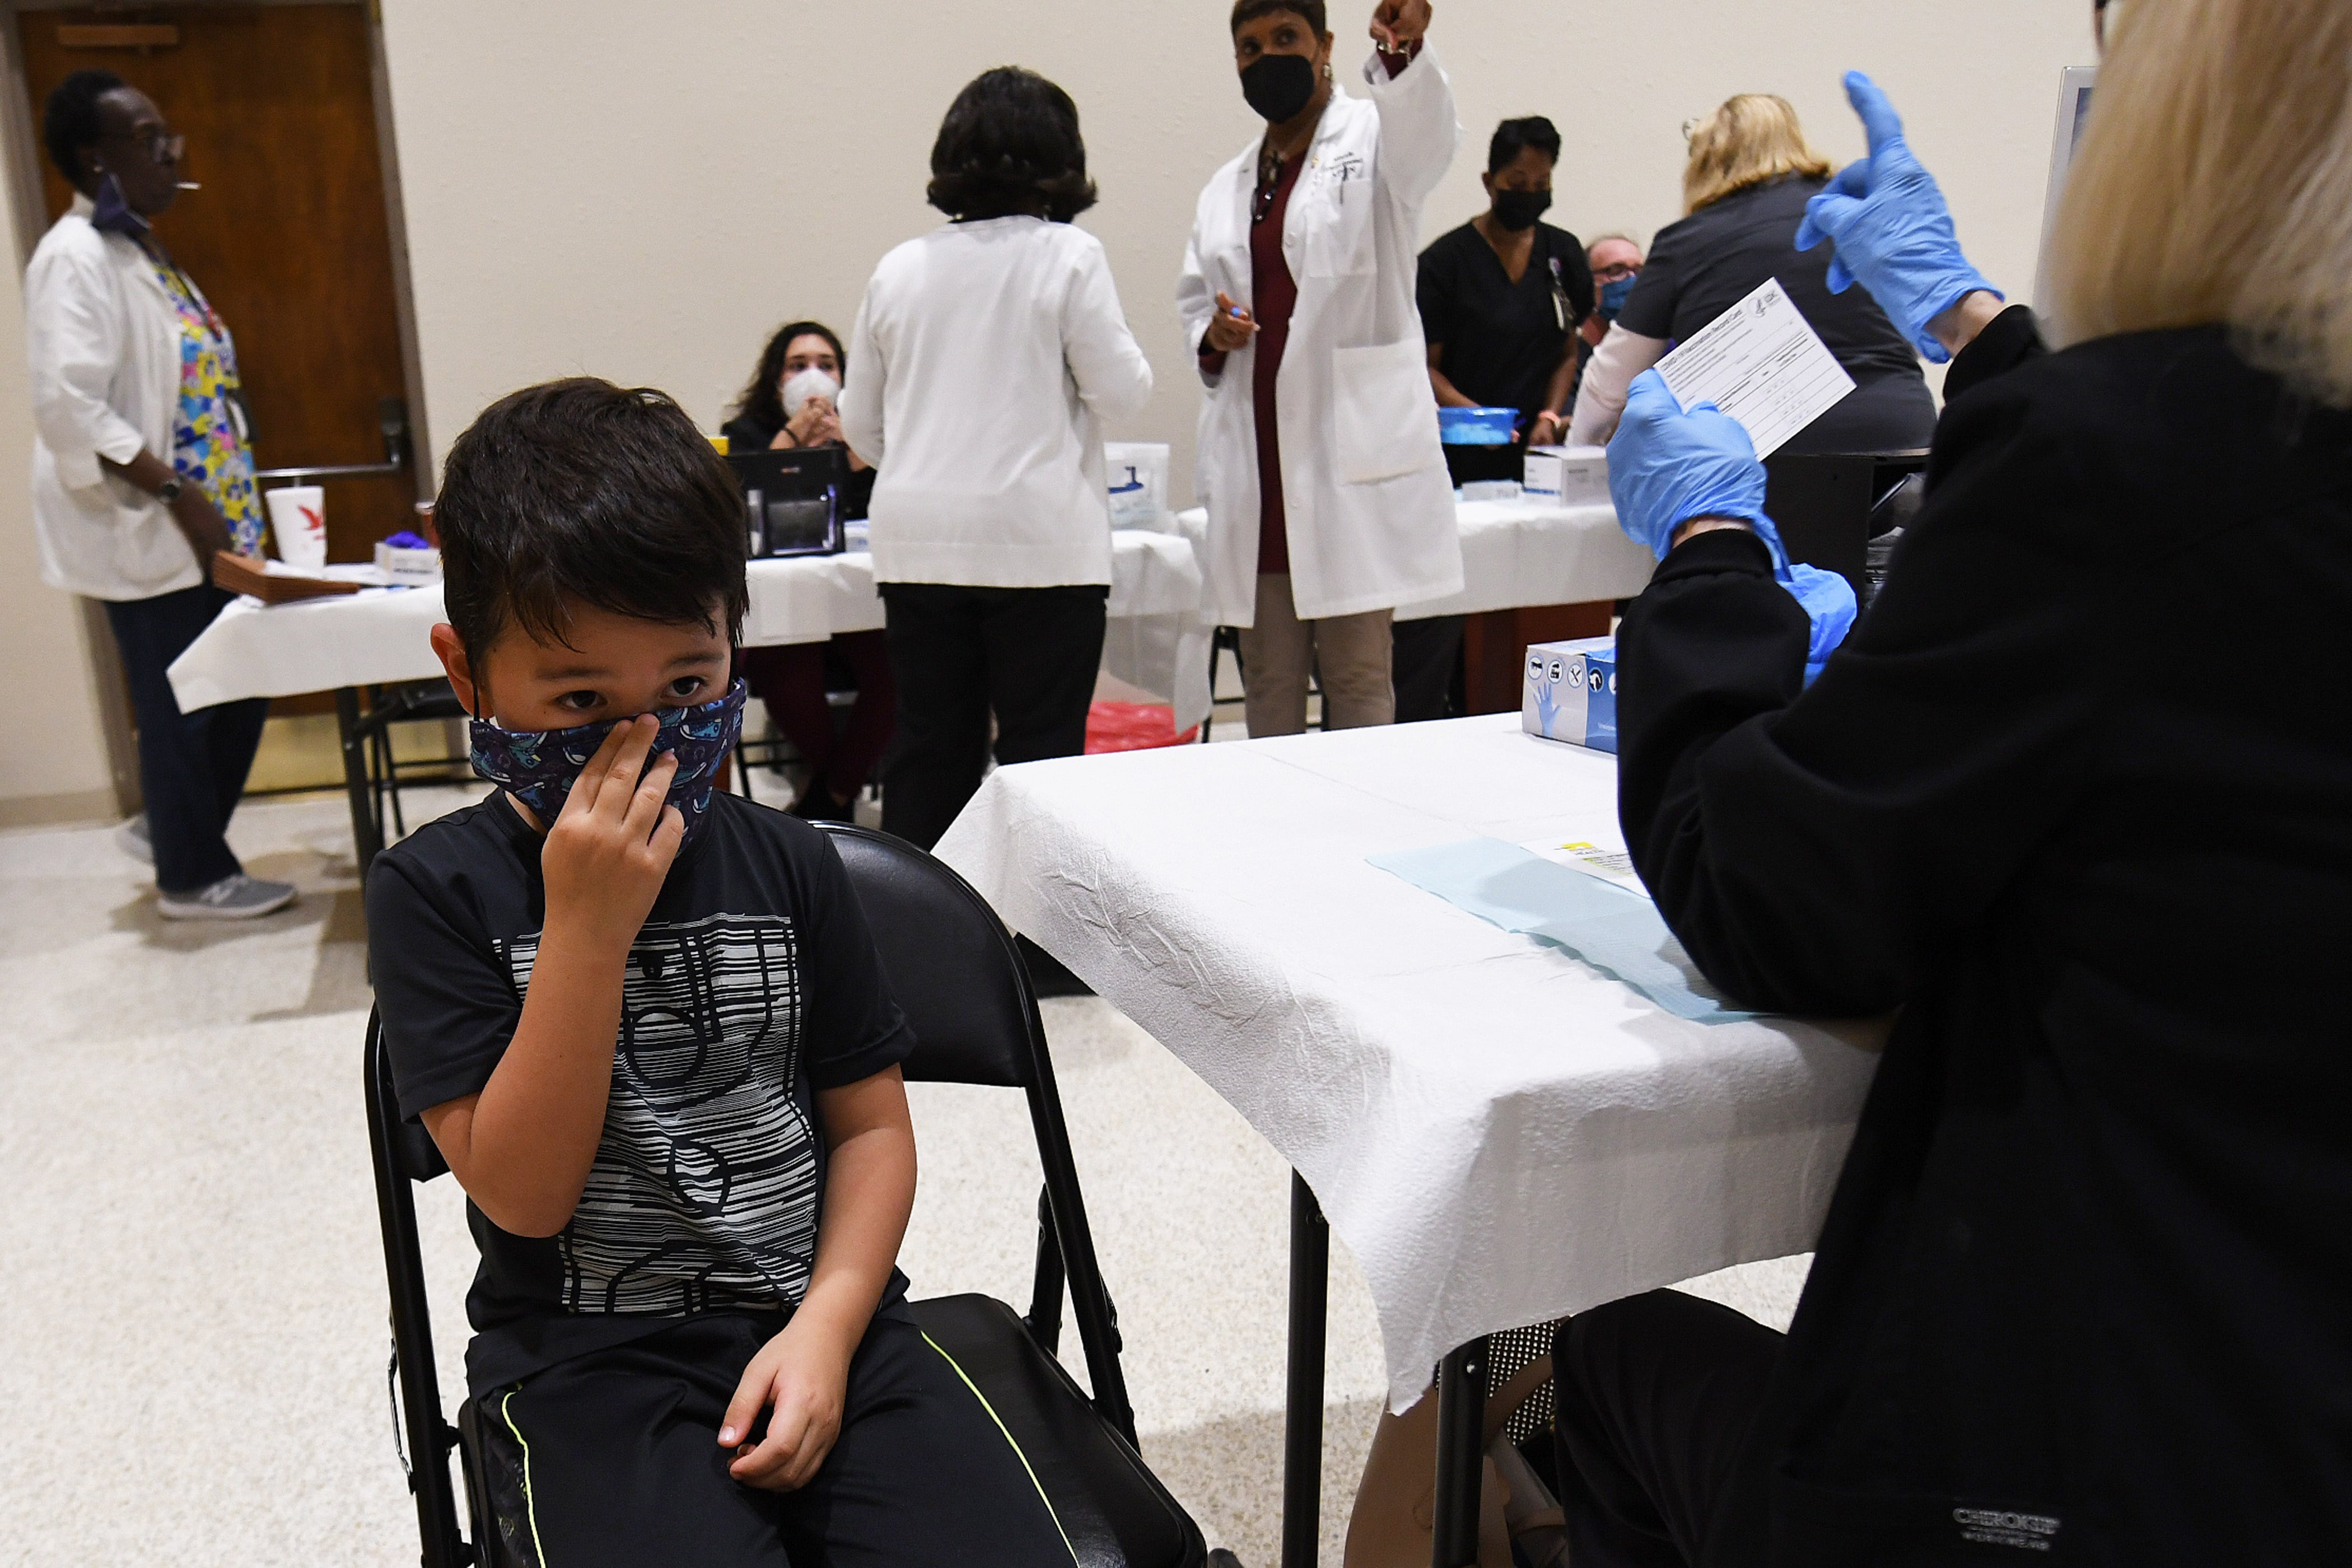 A young boy wearing a black t-shirt prepares for a health care professional to administer a dose of a COVID vaccine, as others work at tables in the background.